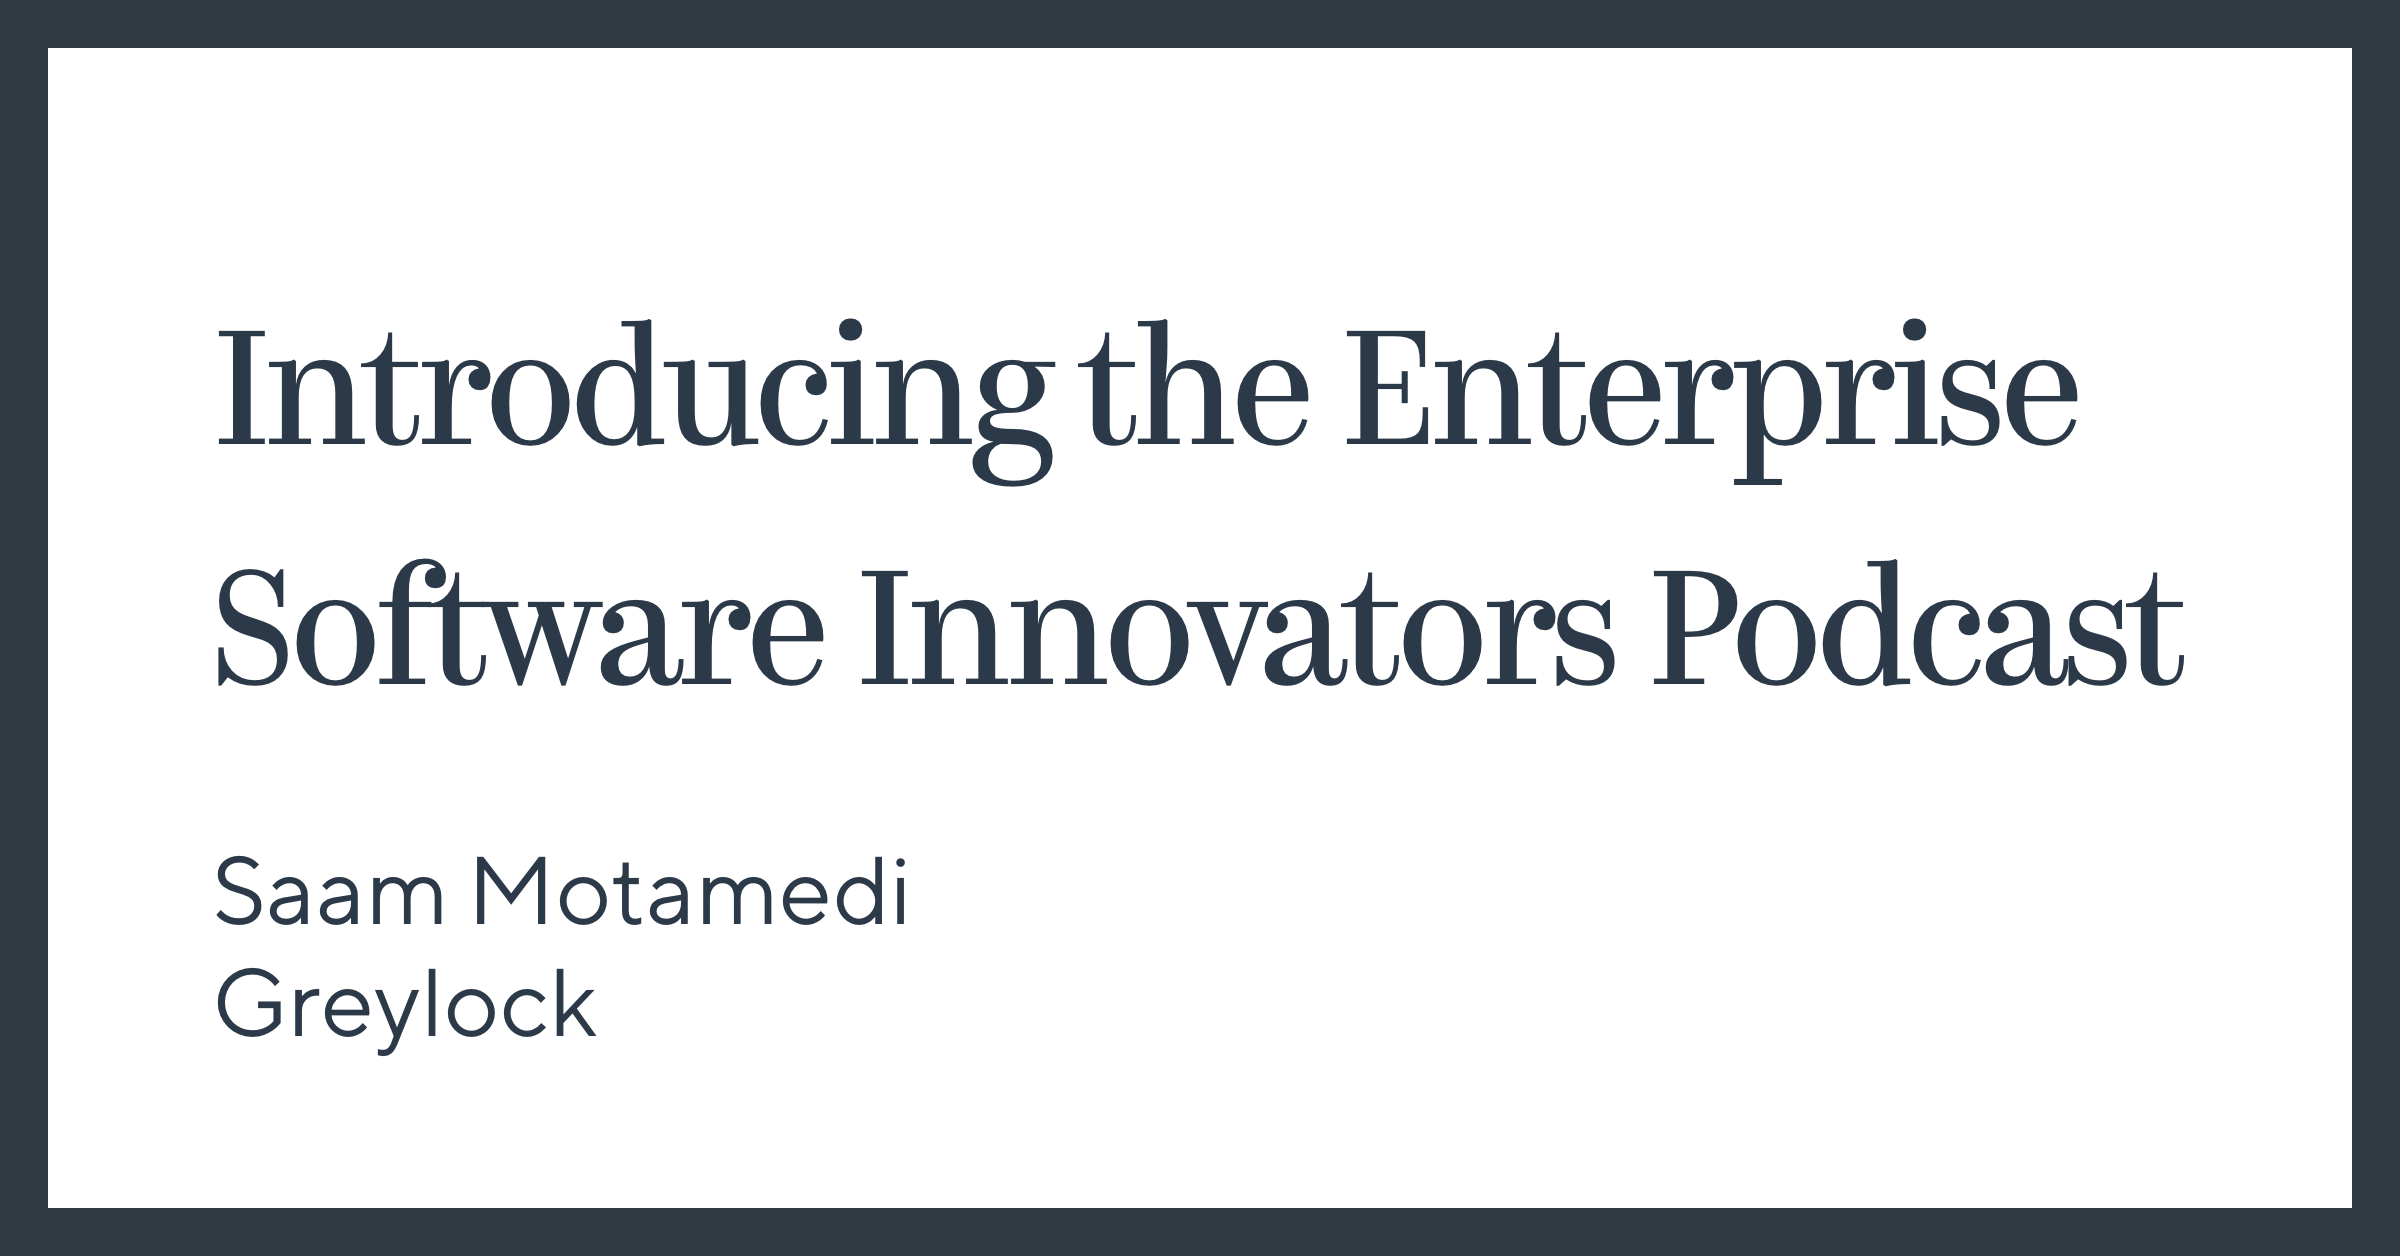 Introducing the Enterprise Software Innovators Podcast